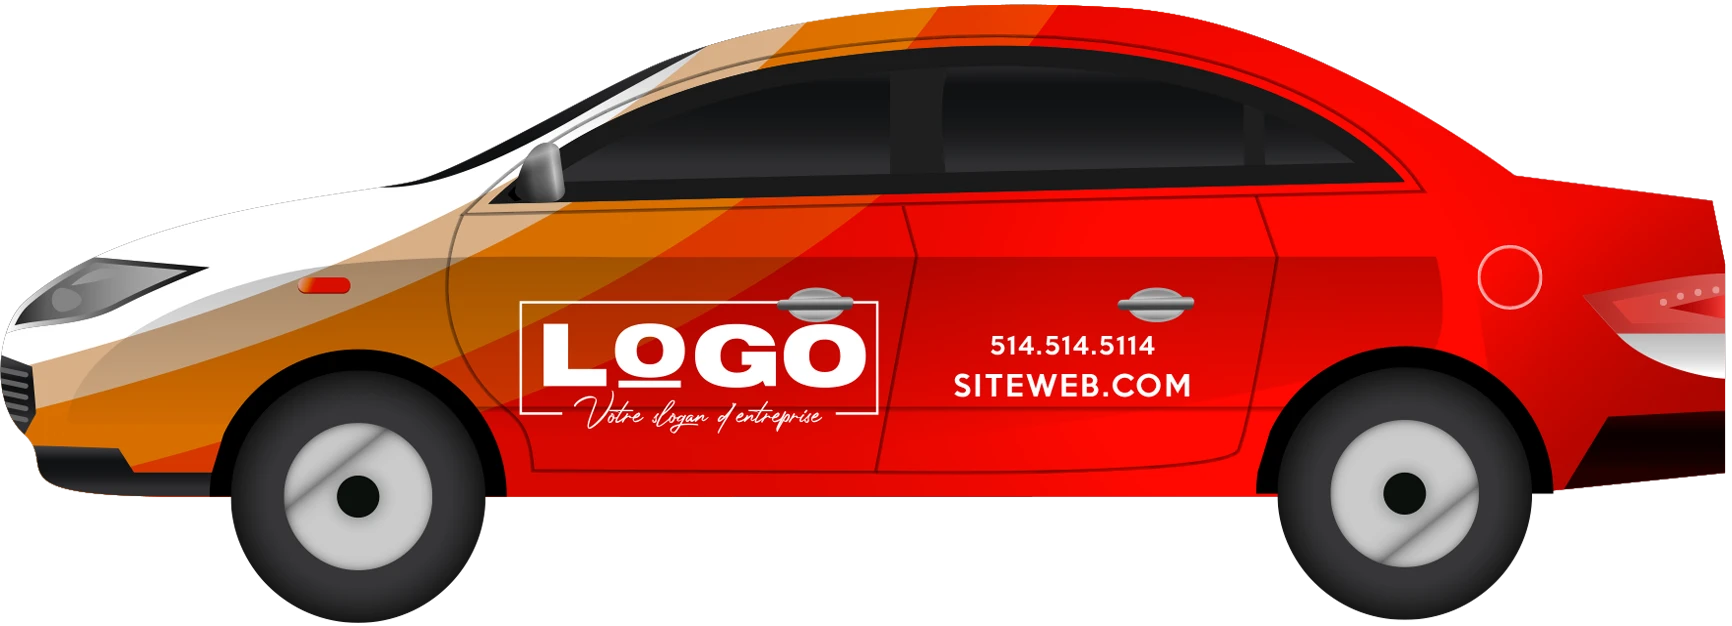 Lettering for full vehicle wrapping professional | l'Assomption, Mascouche